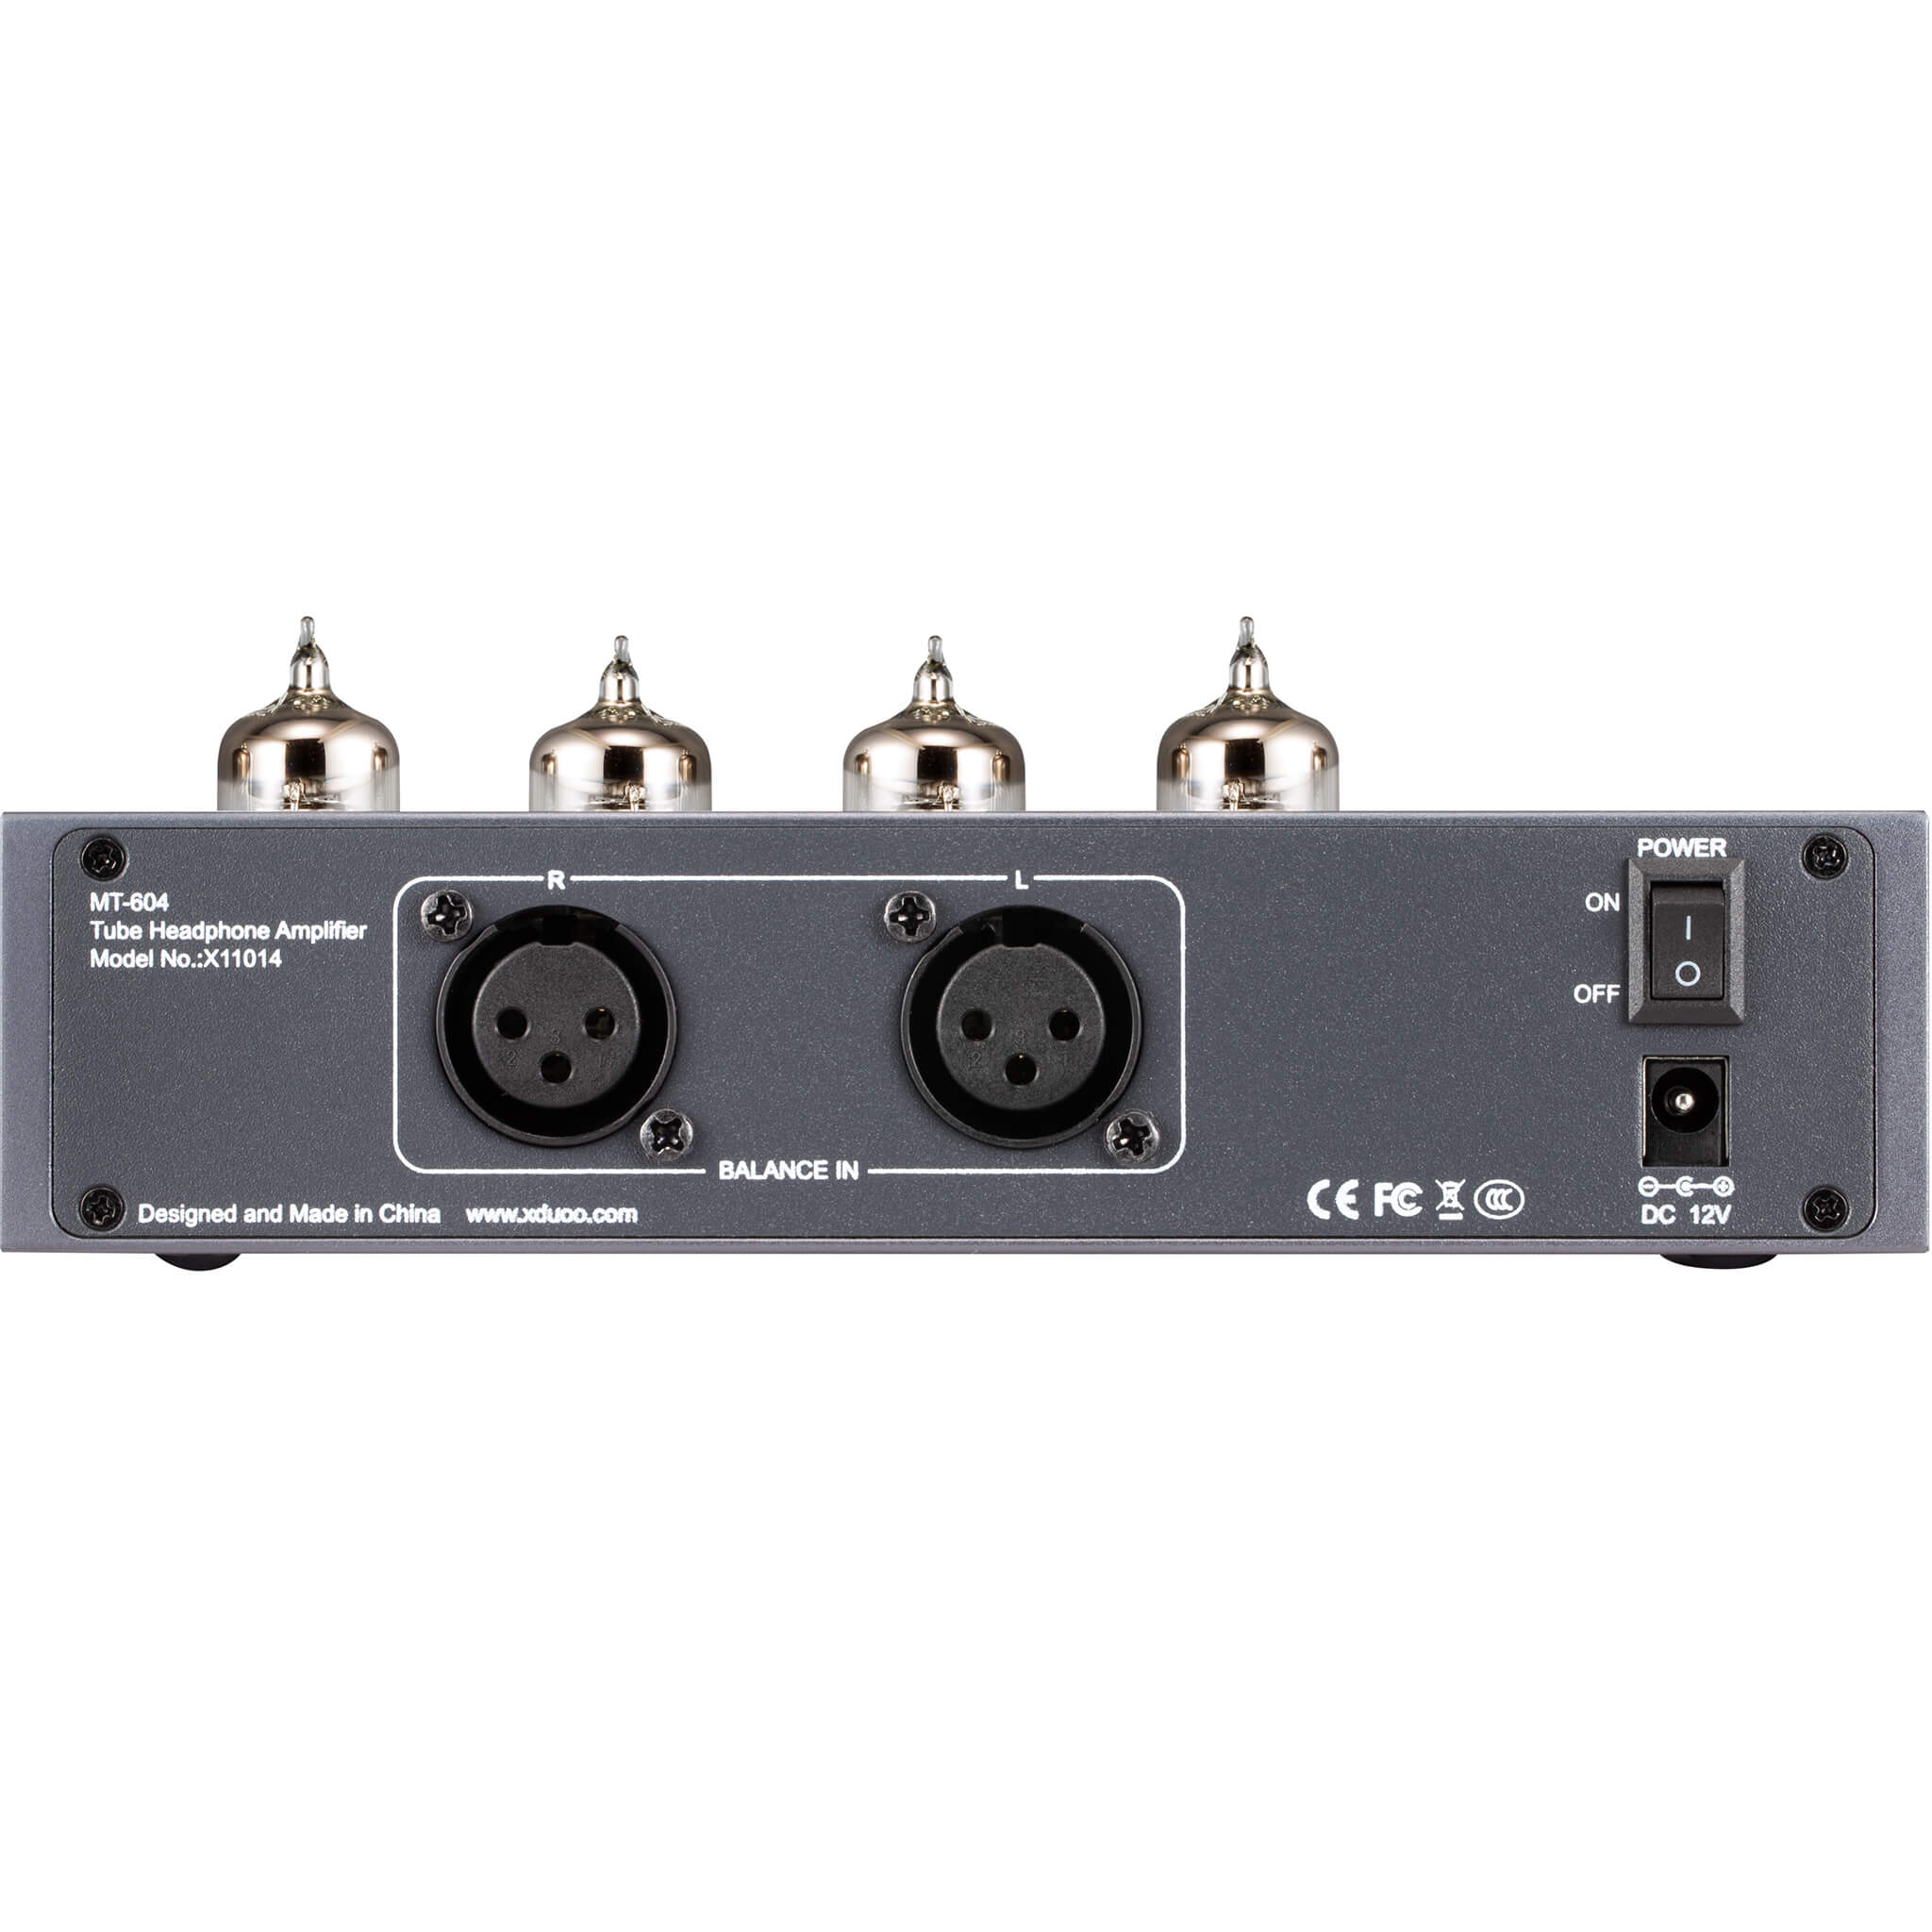 Buy xDuoo MT-604 Headphone Amplifiers at HiFiNage in India with warranty.